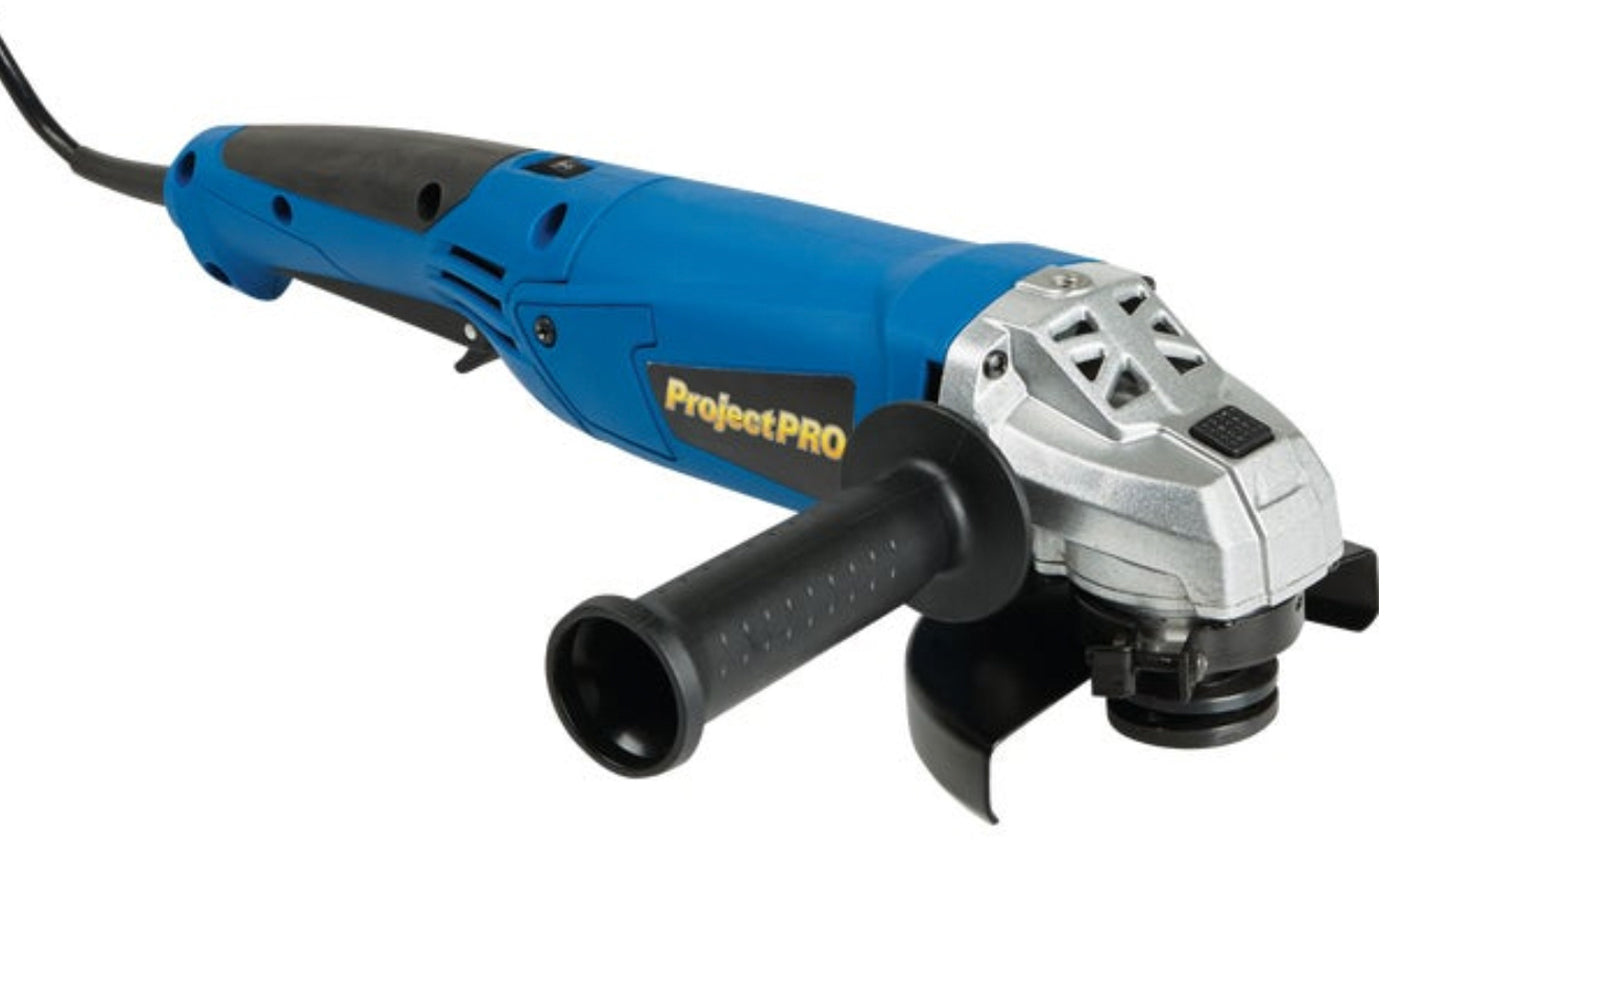 Project-Pro 4-1/2" 10-Amp Angle Grinder. Economy priced power tool, ideal for DIY users. Larger paddle switch for additional ease of use. Cast aluminum gear housing with 2-position side handle. Accepts 4" & 4-1/2" wheels with a 7/8" arbor. Spindle lock for fast wheel changes. Includes side handle and wrench. UL approved. Made by Project Pro.